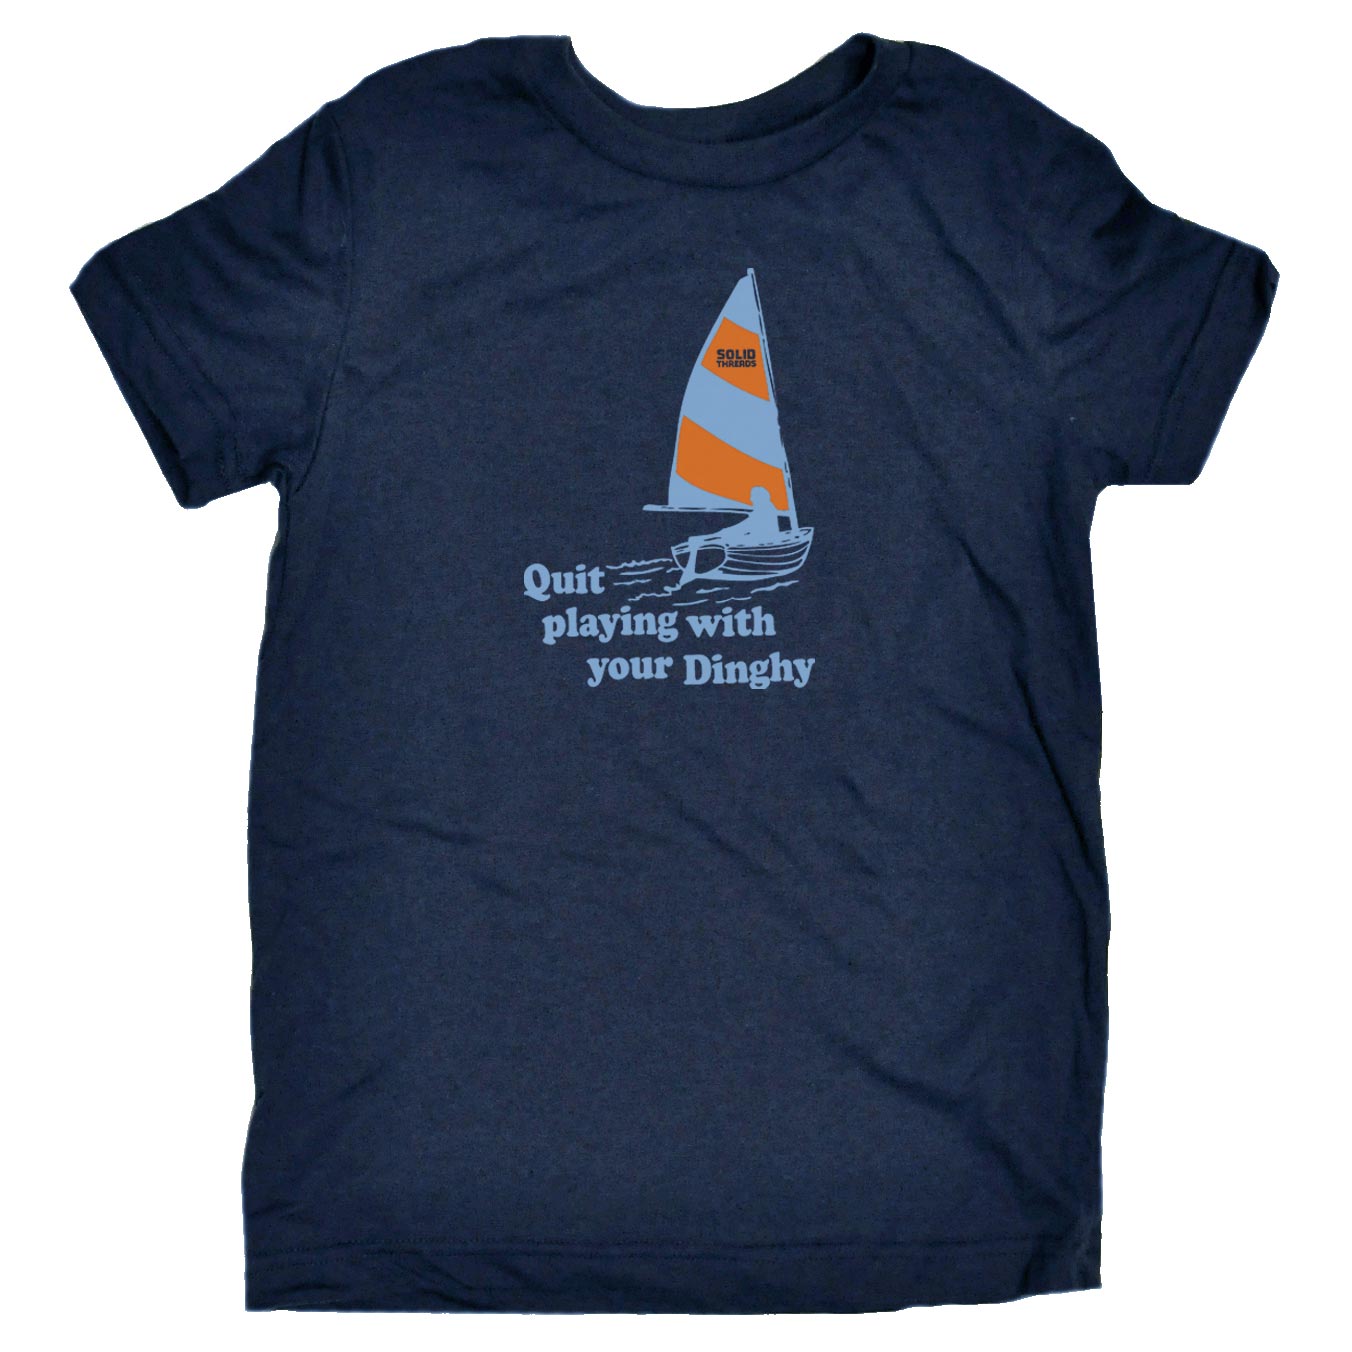 Kids Playing with Your Dinghy Cute Graphic T-Shirt | Funny Sailing Tee Navy / Age 2